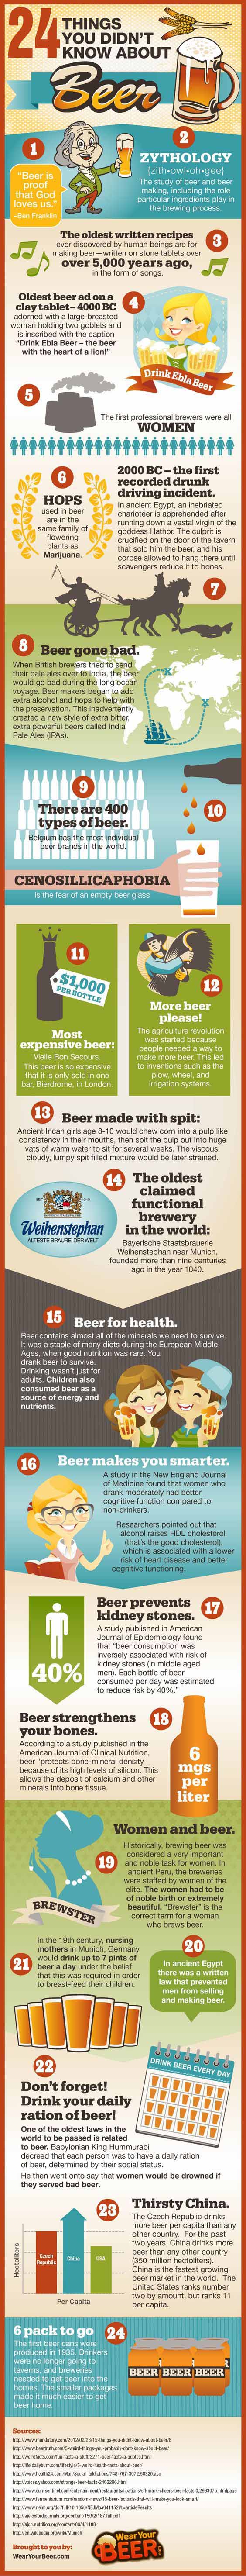 24 things you didnt know about beer